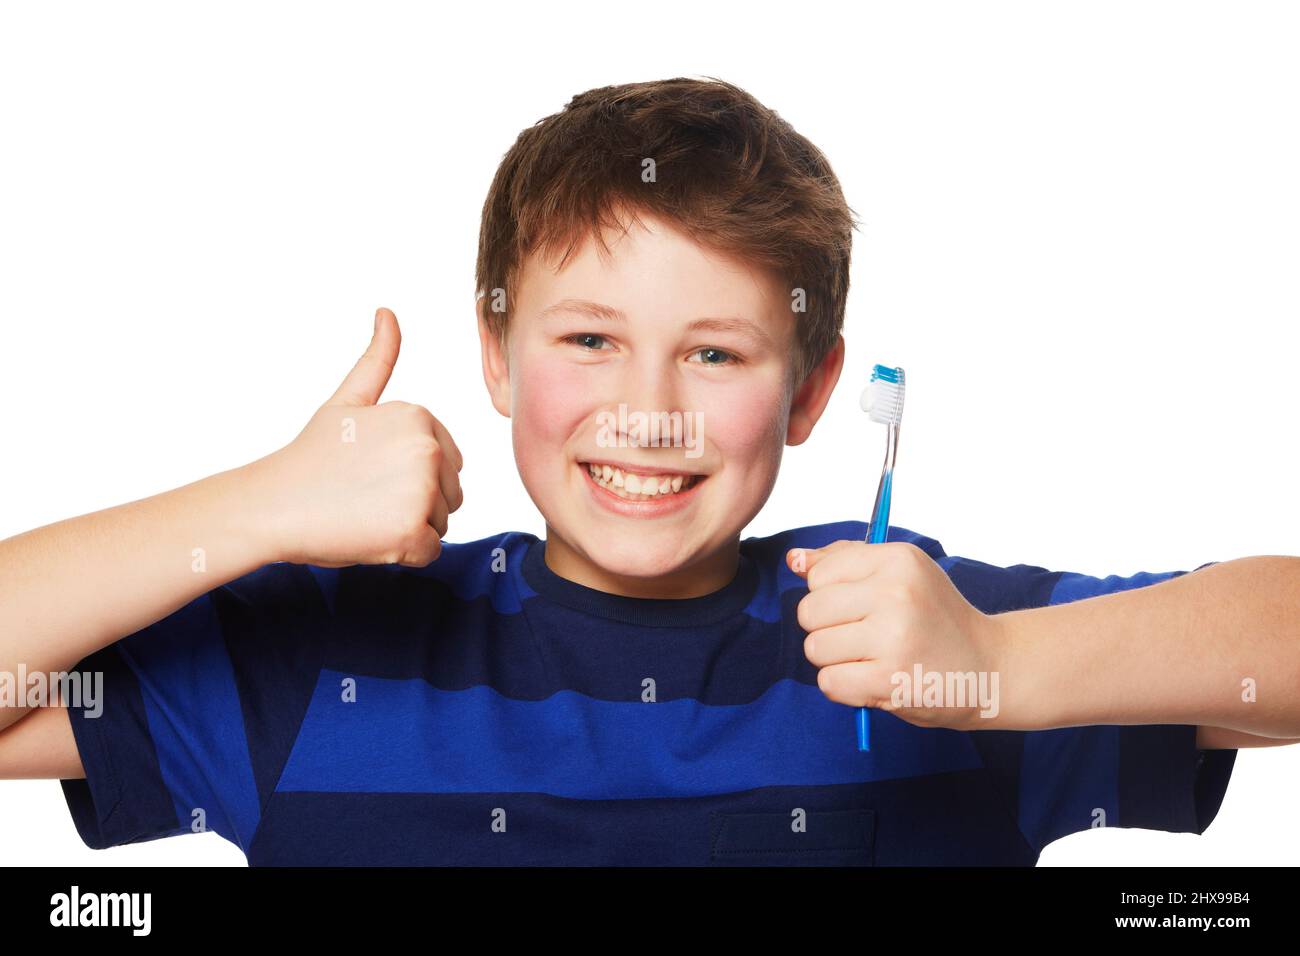 Dental hygiene gets the thumbs up. Portrait of a young boy holding is toothbrush and giving a thumbs up. Stock Photo